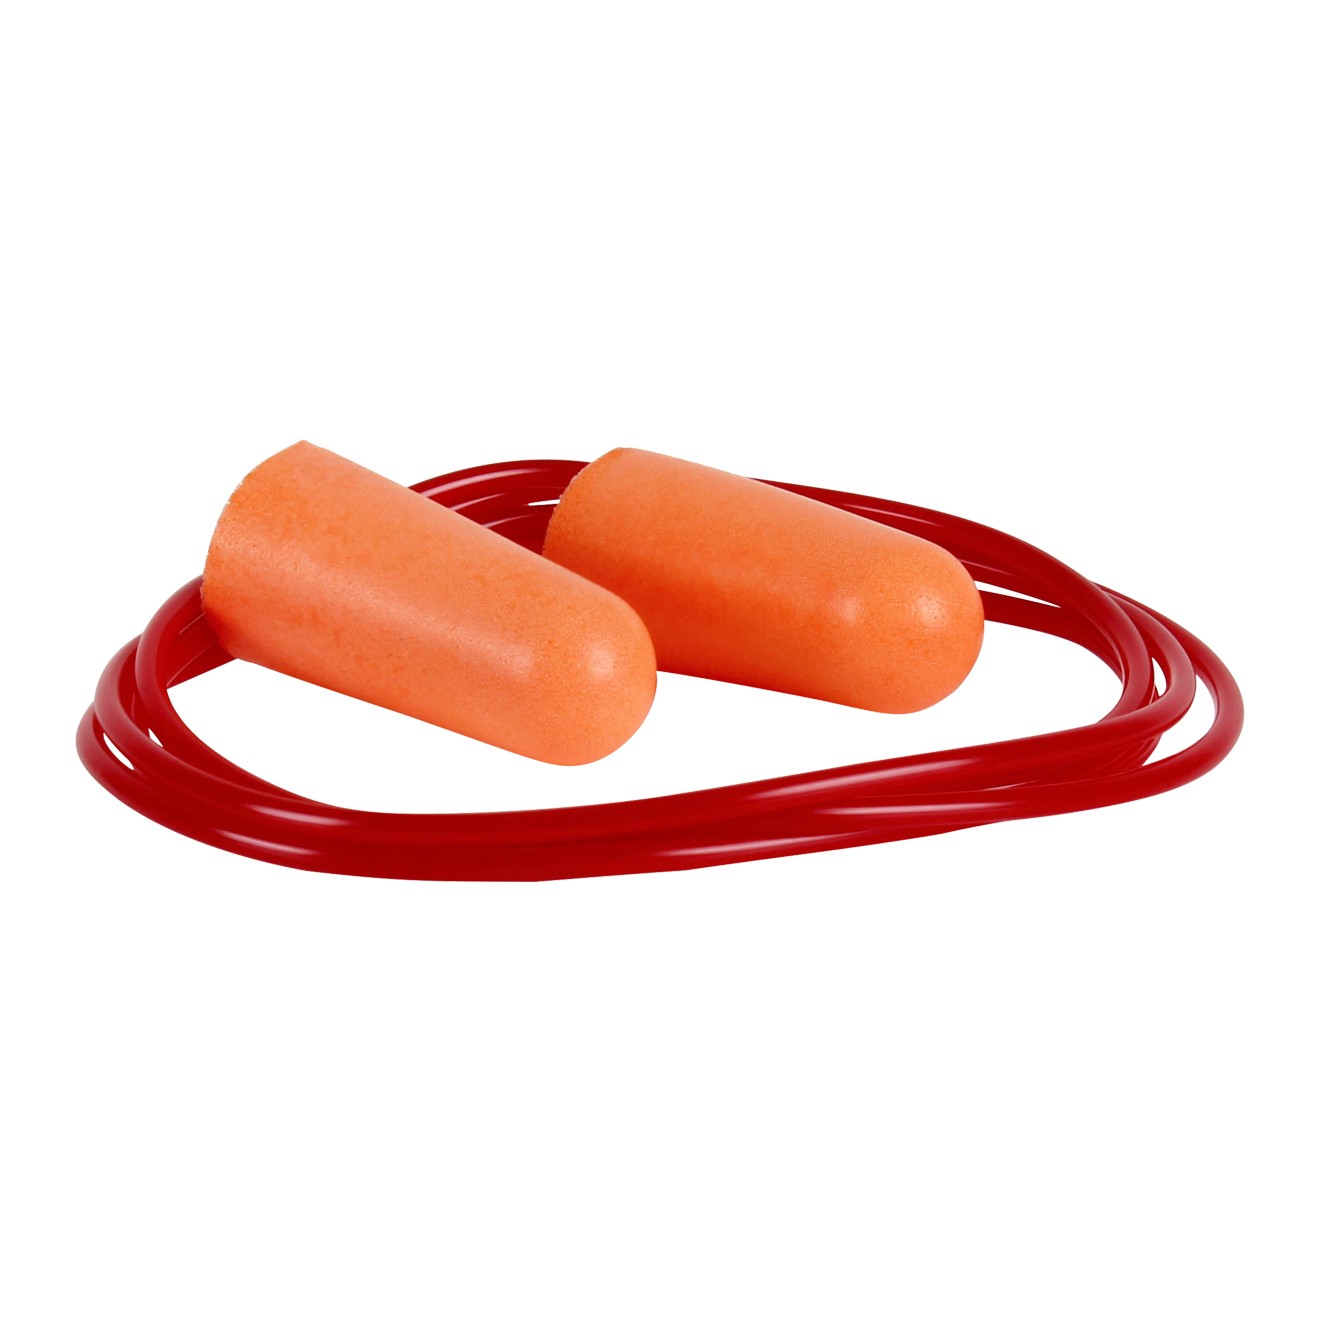 Foam Ear Plugs - 5 pairs with cord